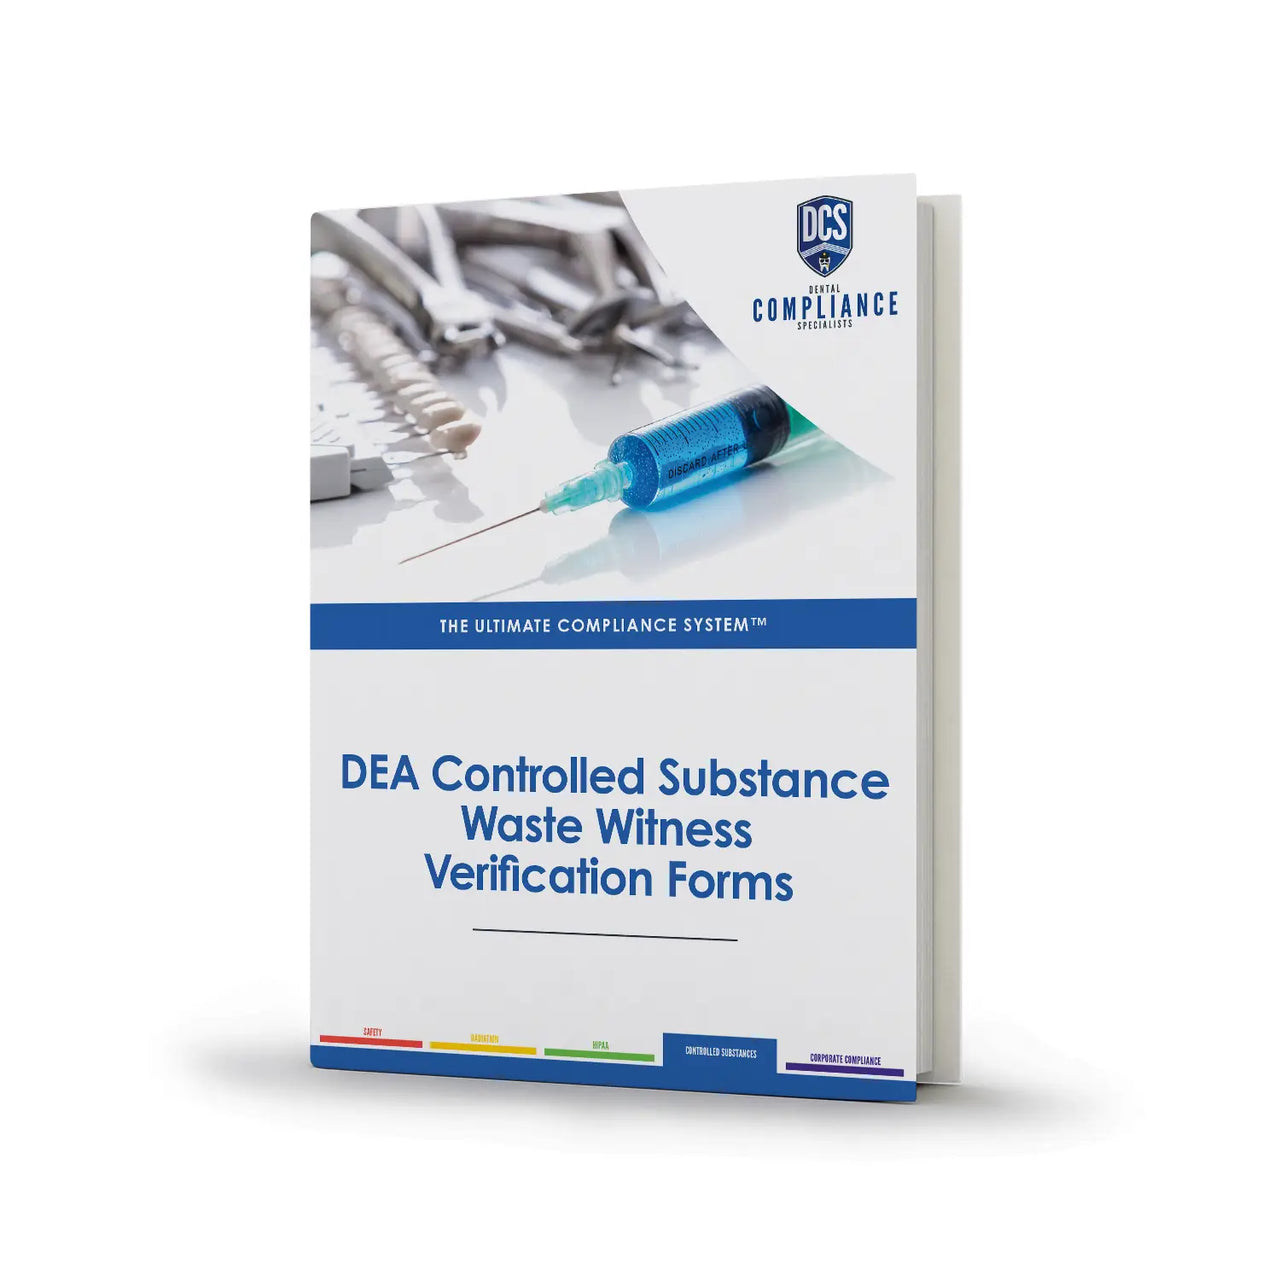 DEA Controlled Substance Waste Witness Verification Forms